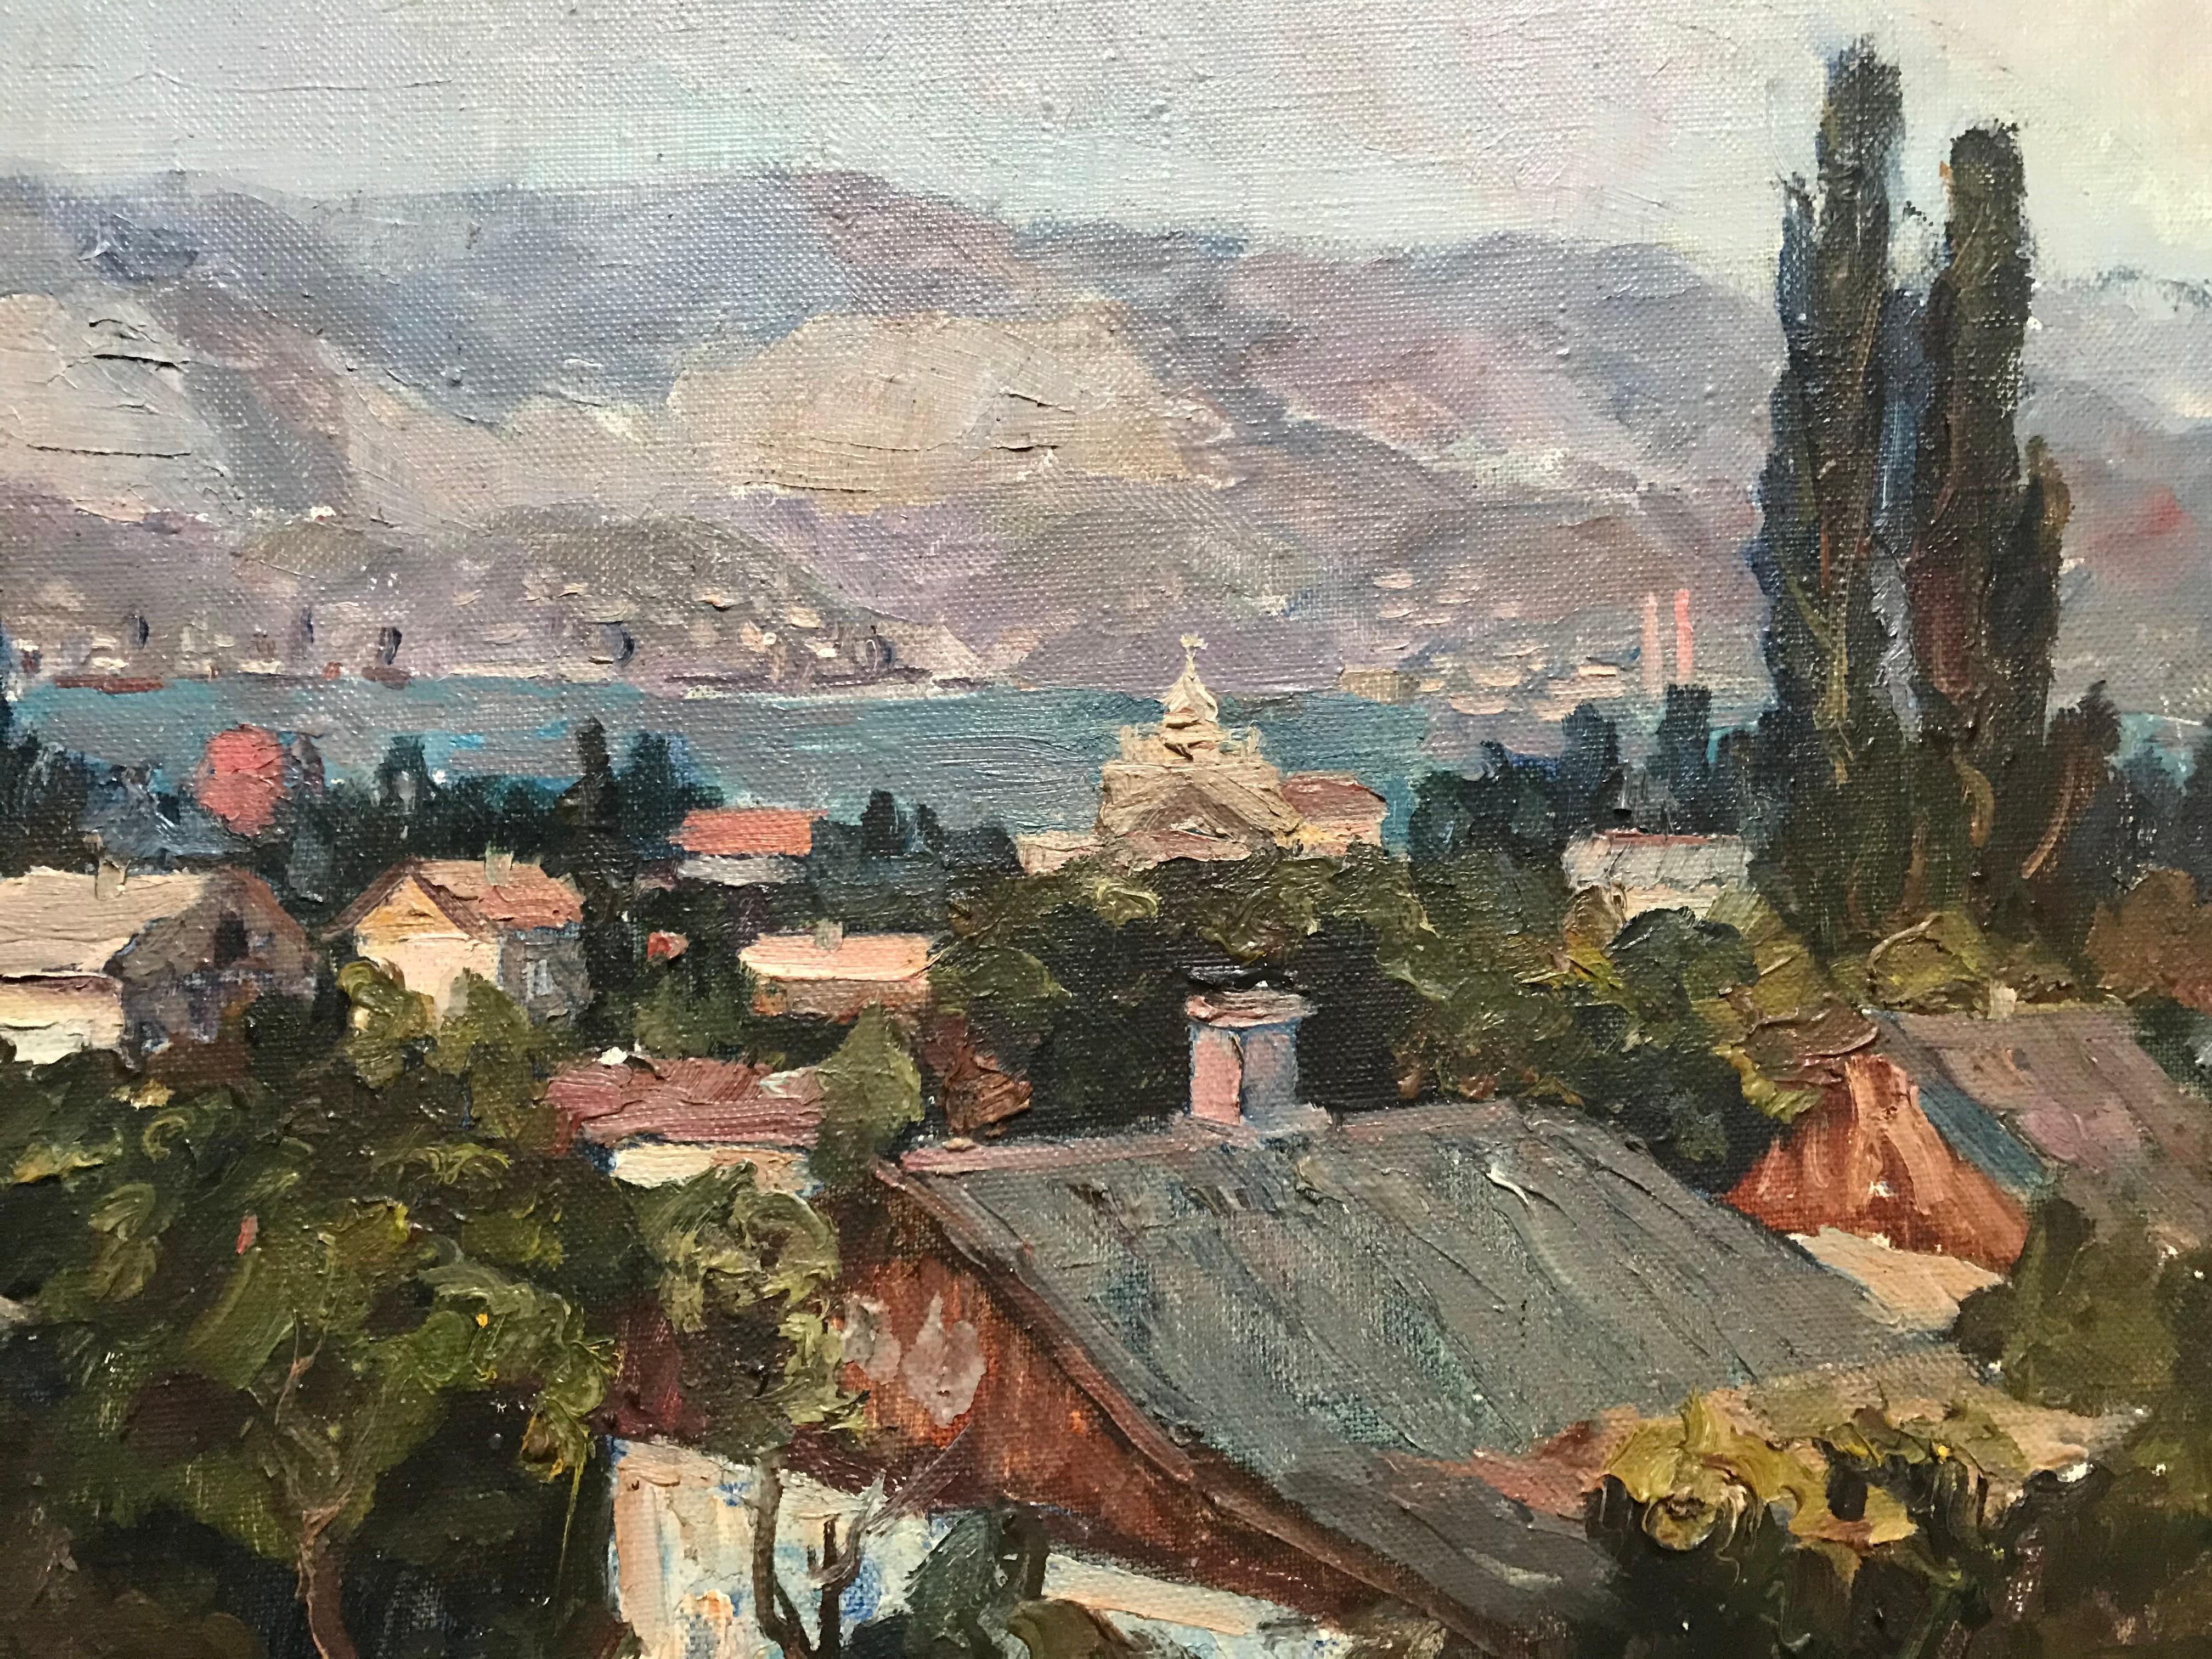 Another fine Impressionist oil painting from Ukraine. A pretty village is perched at the edge of a bay with ships in the harbor that have come in from the sea. In the distance is a range of purplish mountains. Nicely framed and ready to